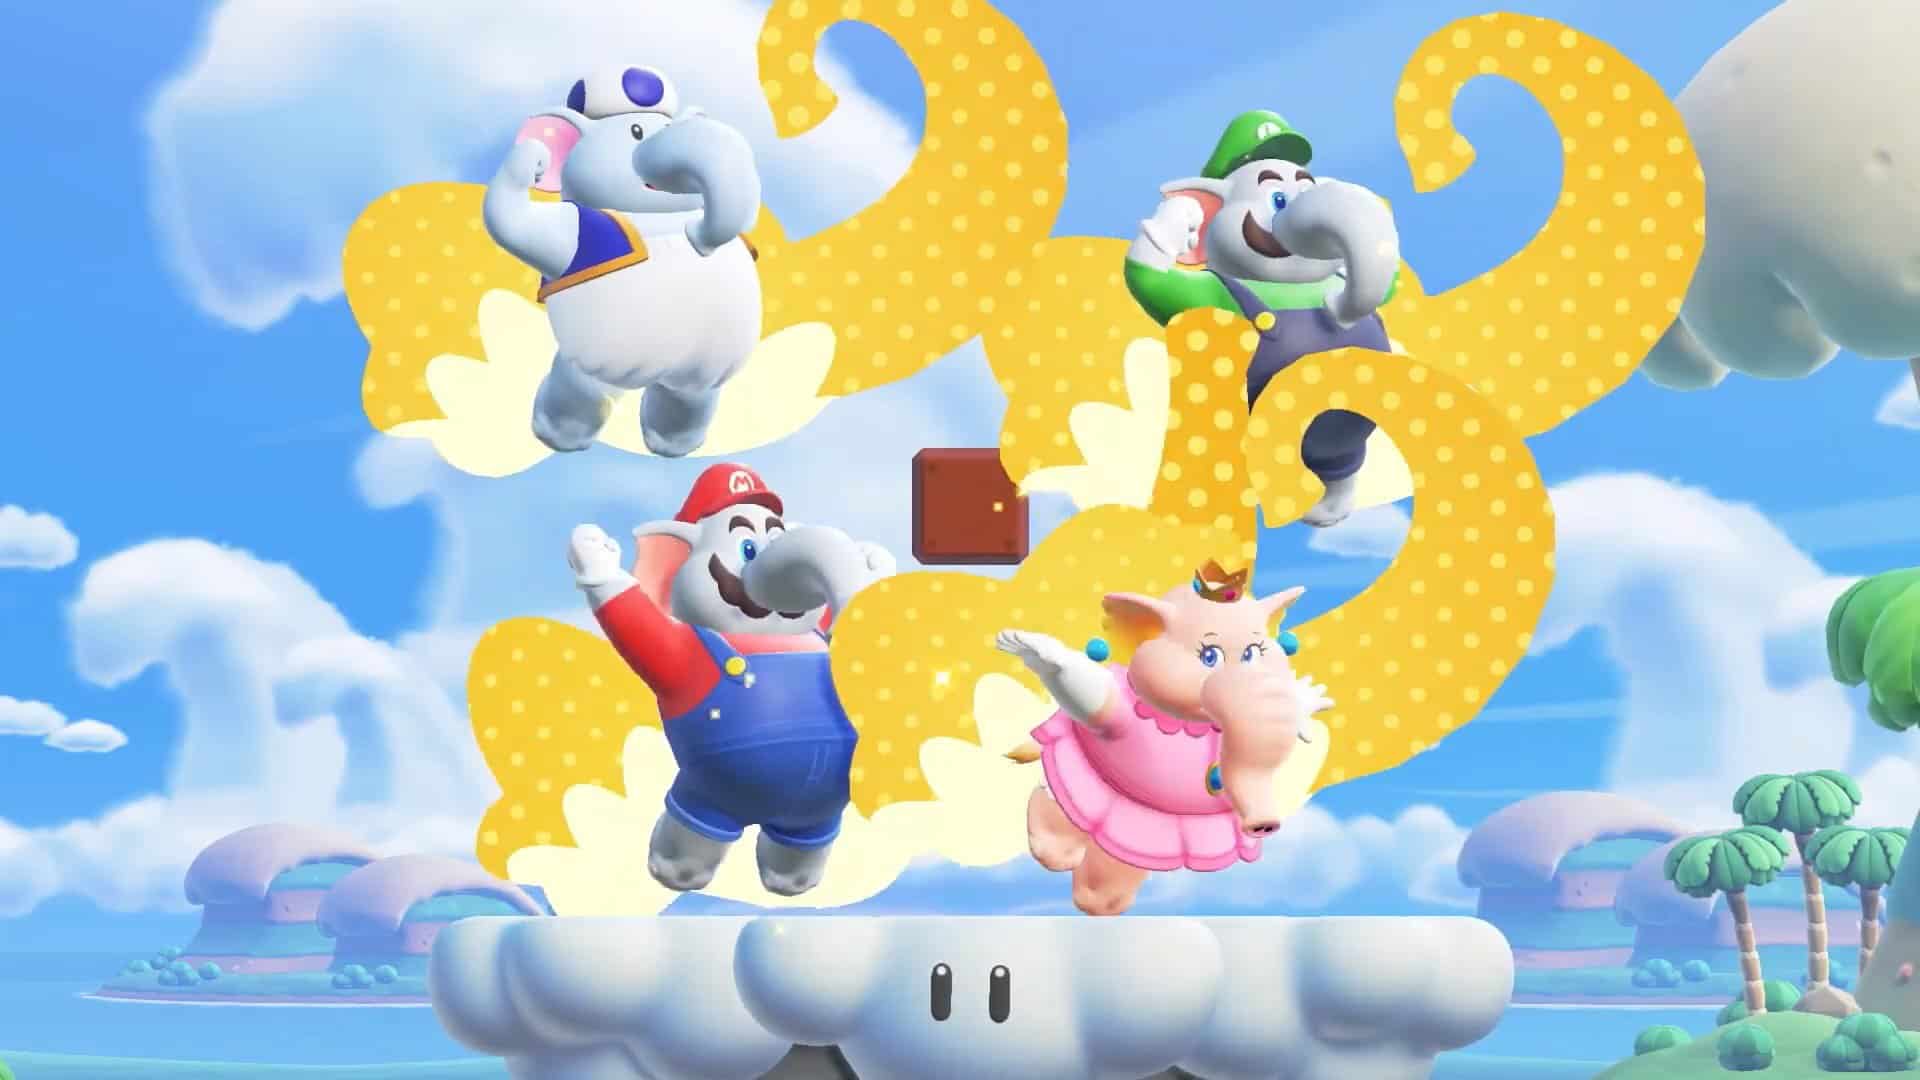 Super Mario Bros. Wonder: Key details from the new Nintendo Switch